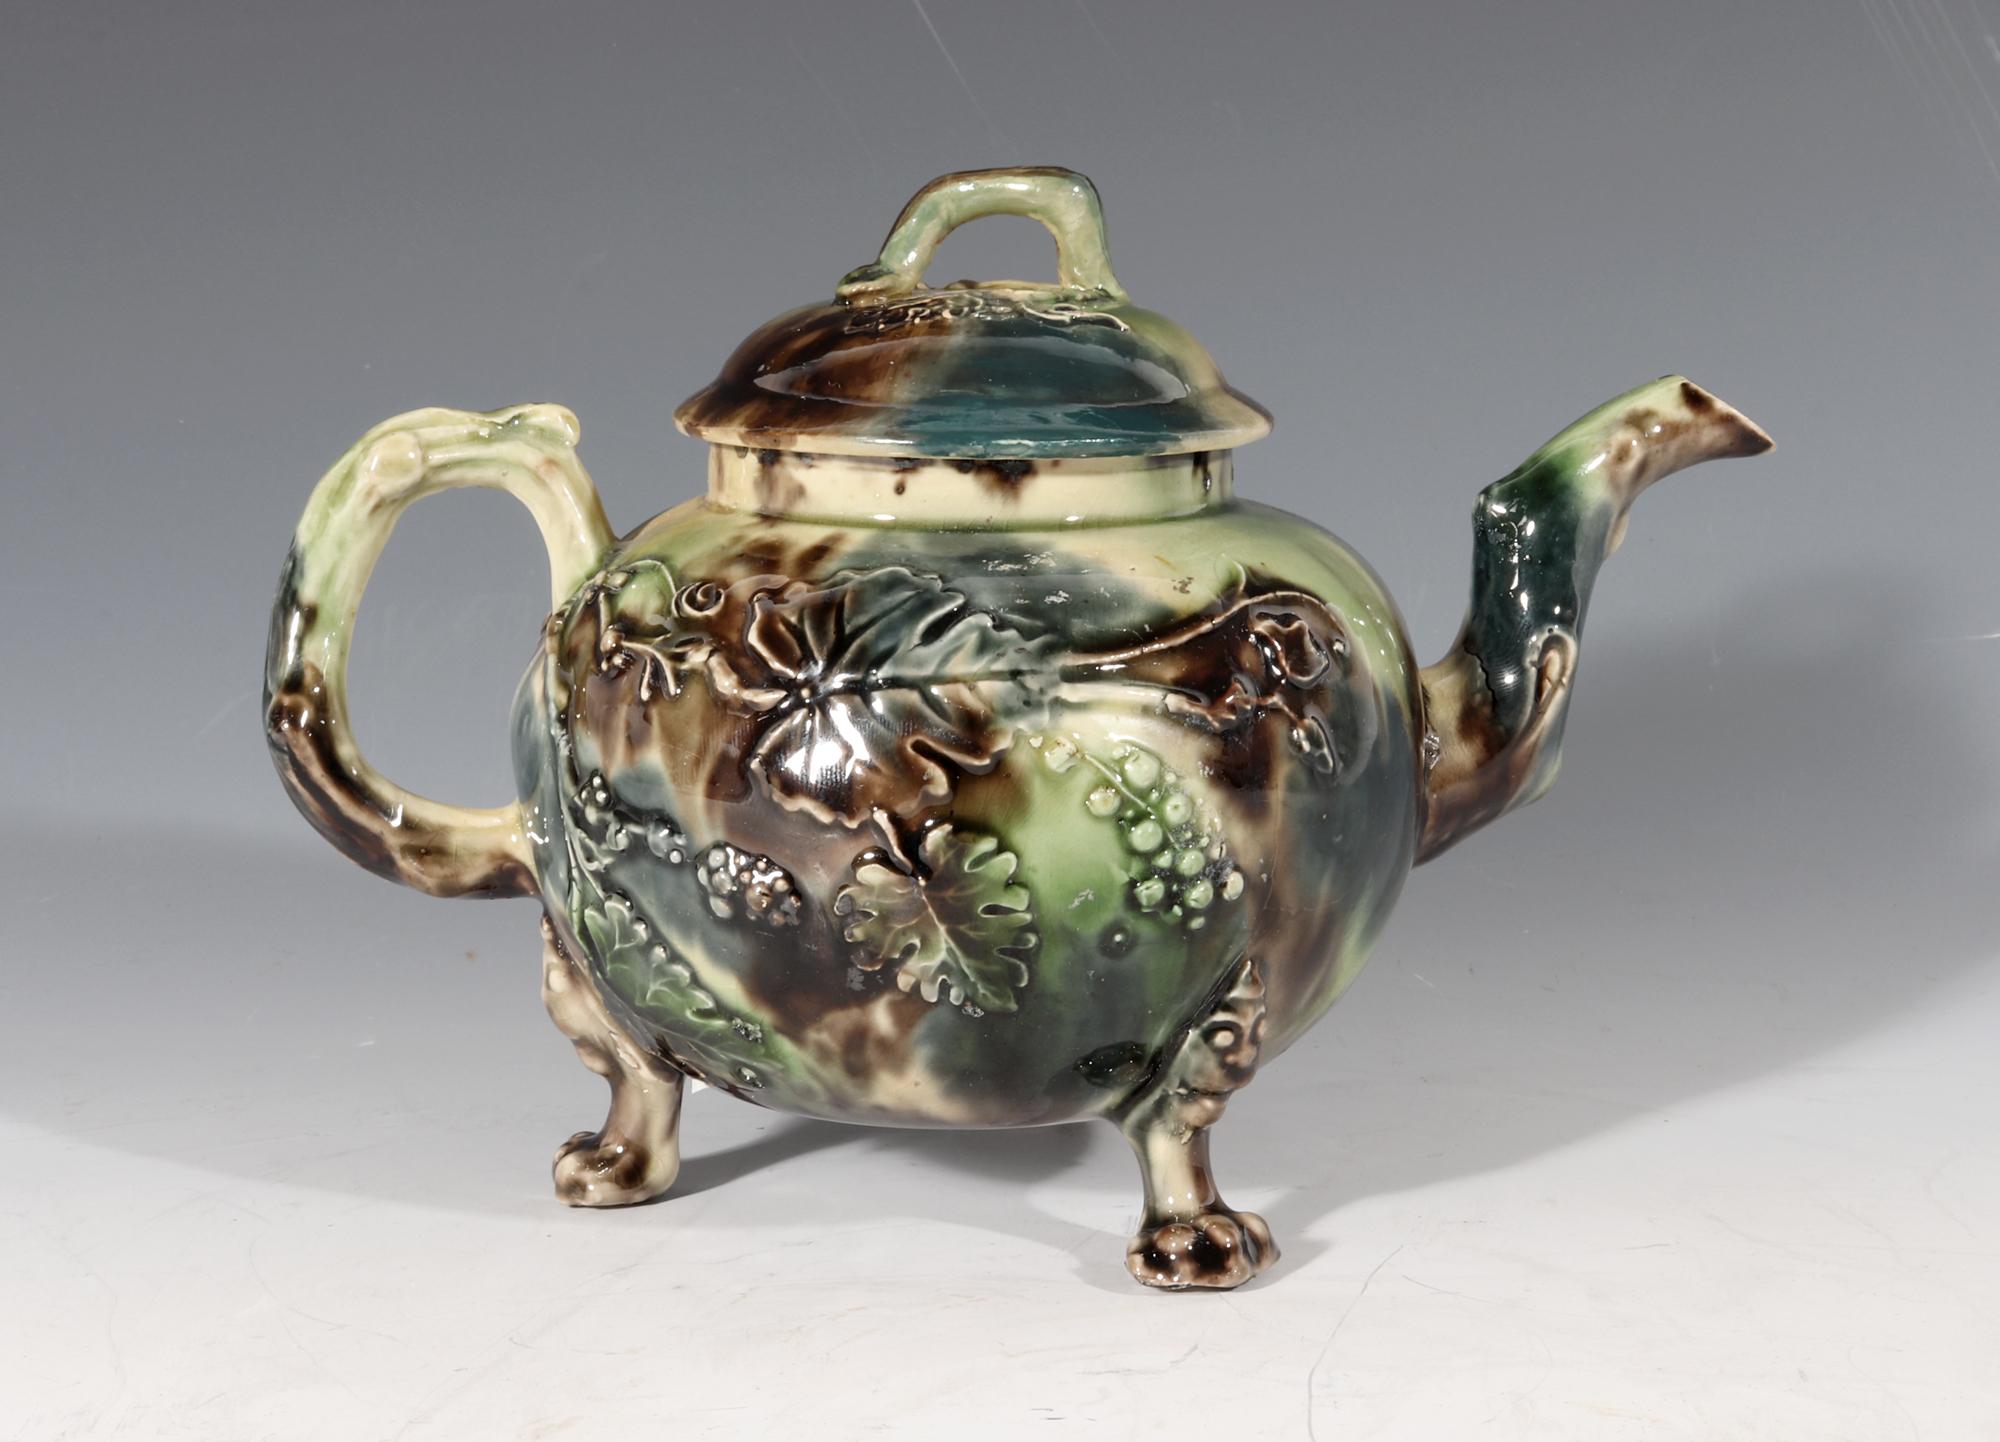 Staffordshire Whieldon-type creamware teapot and cover,
circa 1765-1775

The Whieldon-type cream earthenware teapot has a moulded design of grape vines and large grape leaves to the front and back. The spout and handle of a crabstock form. The